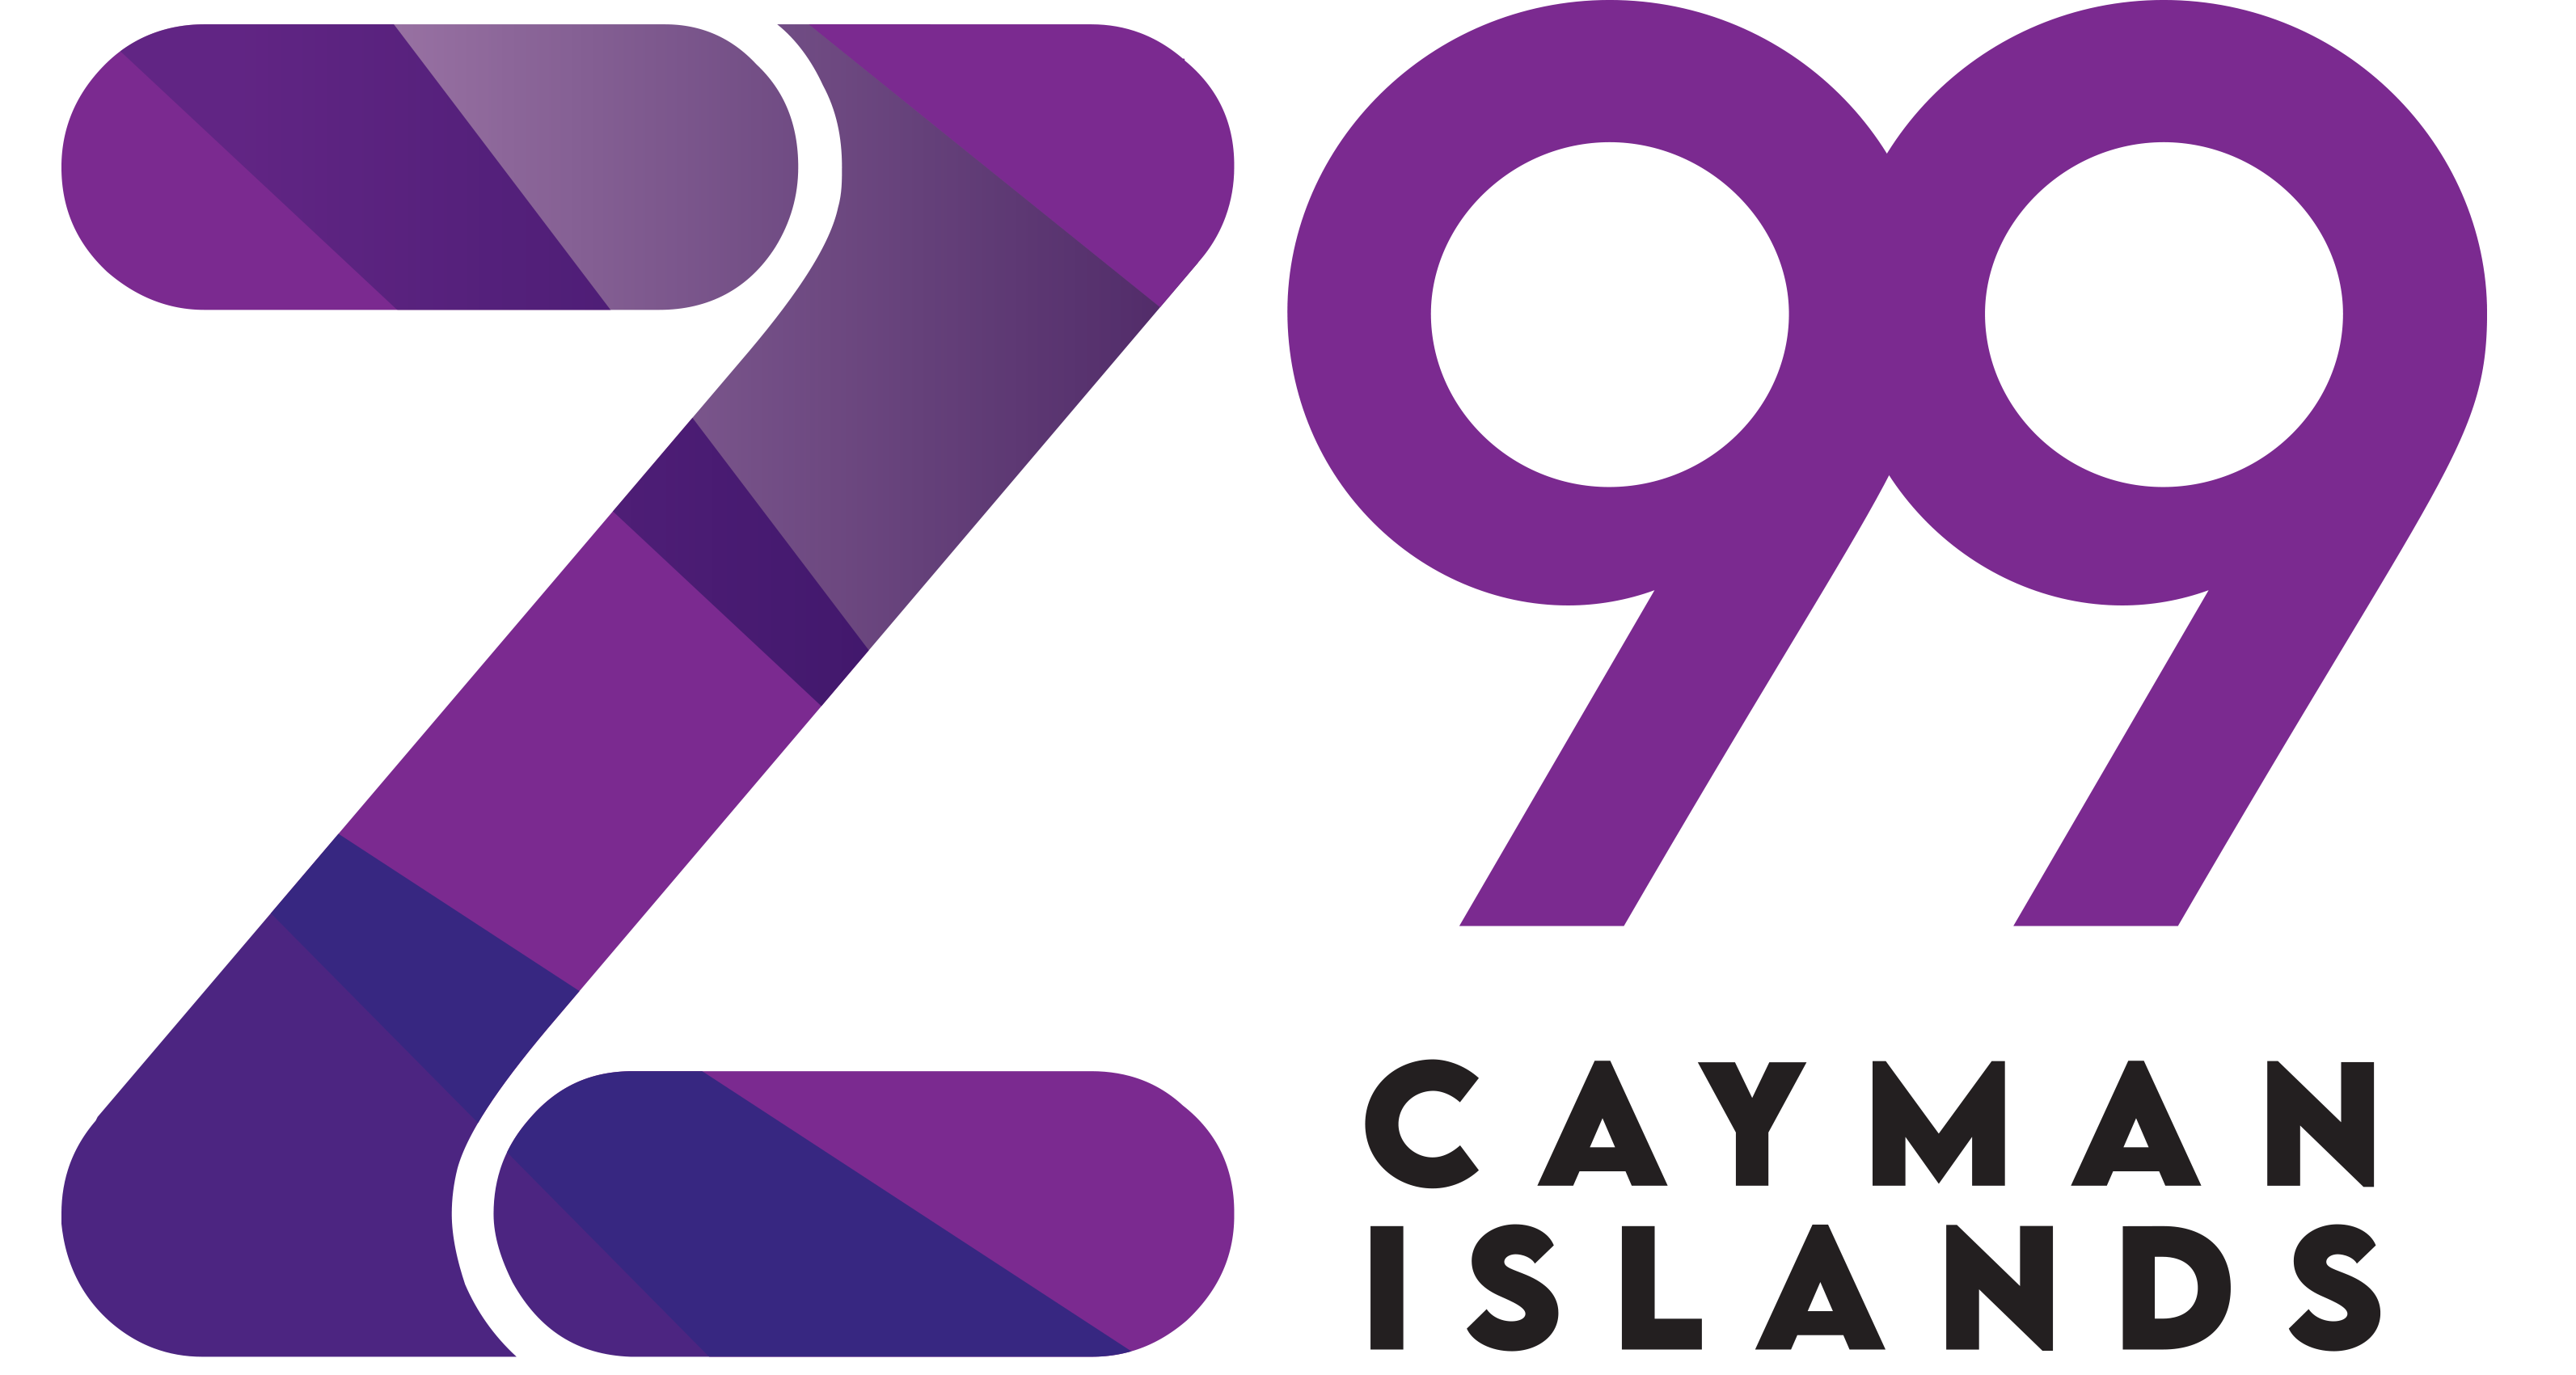  Z99 - The Best Station In The Cayman Islands